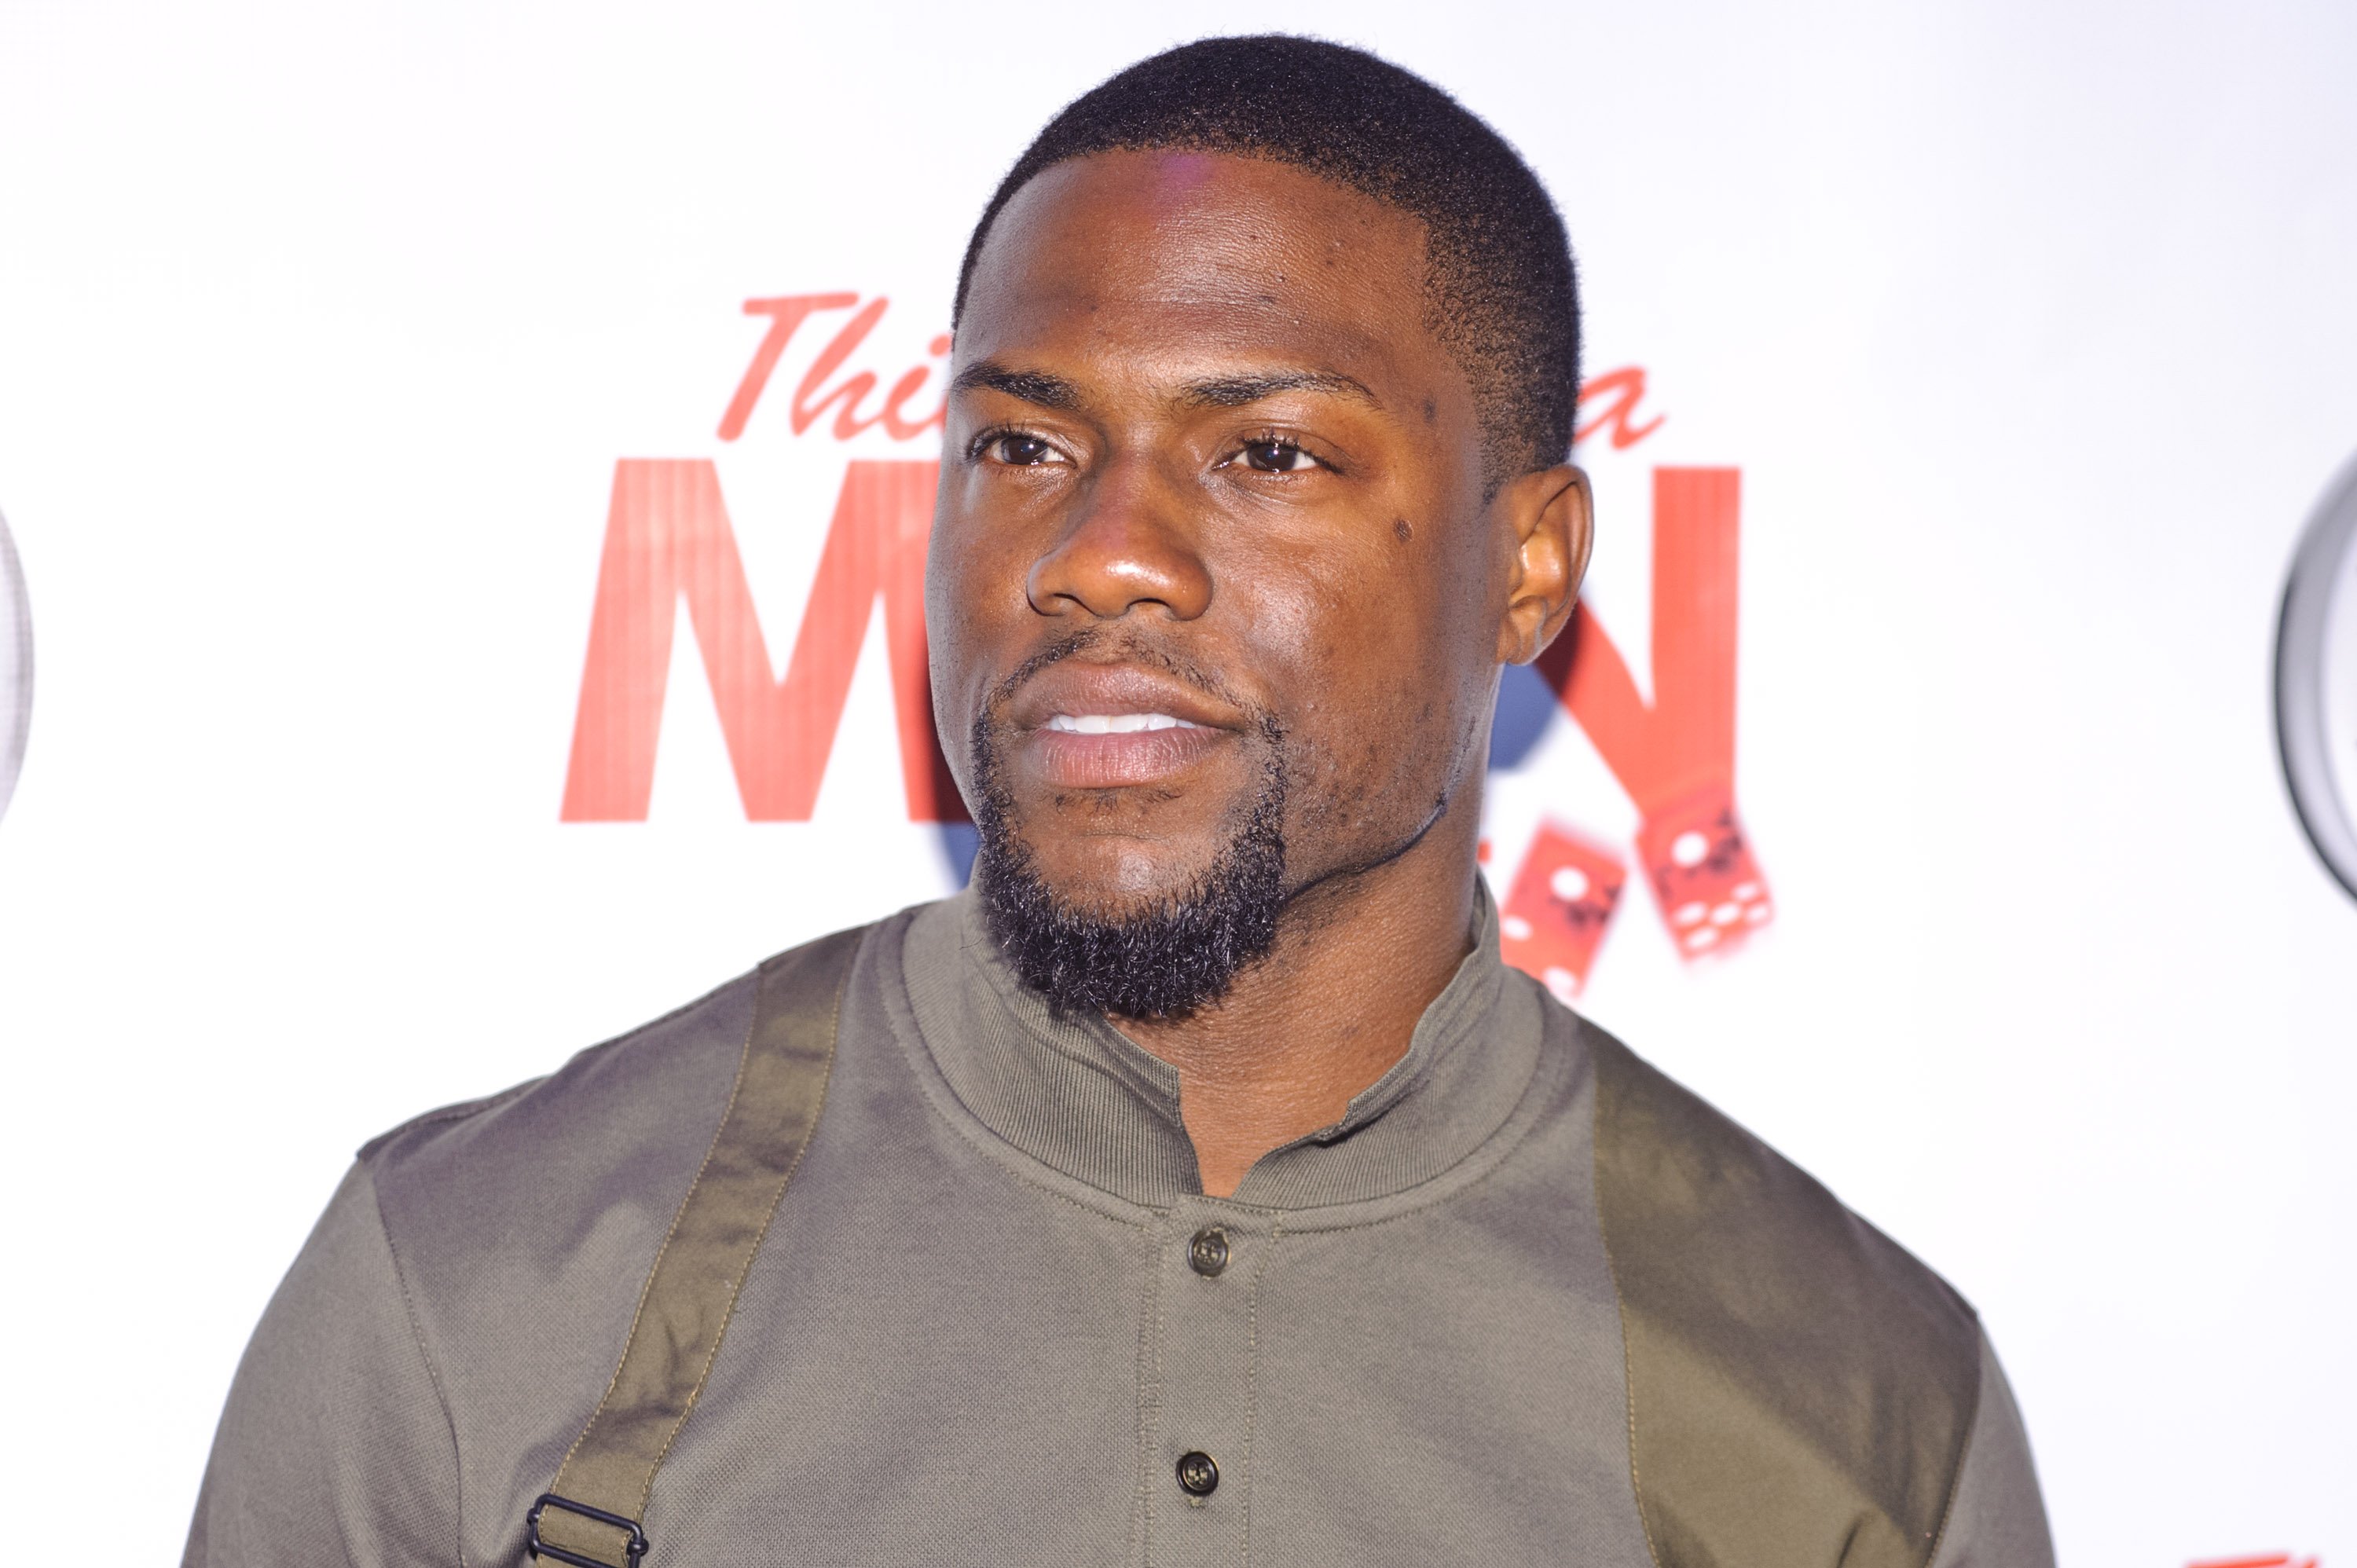 Kevin Hart attends the premiere of the film "Think Like A Man Too" at Showplace Icon Theater on June 12, 2014 in Chicago, Illinois. | Photo: Getty Images